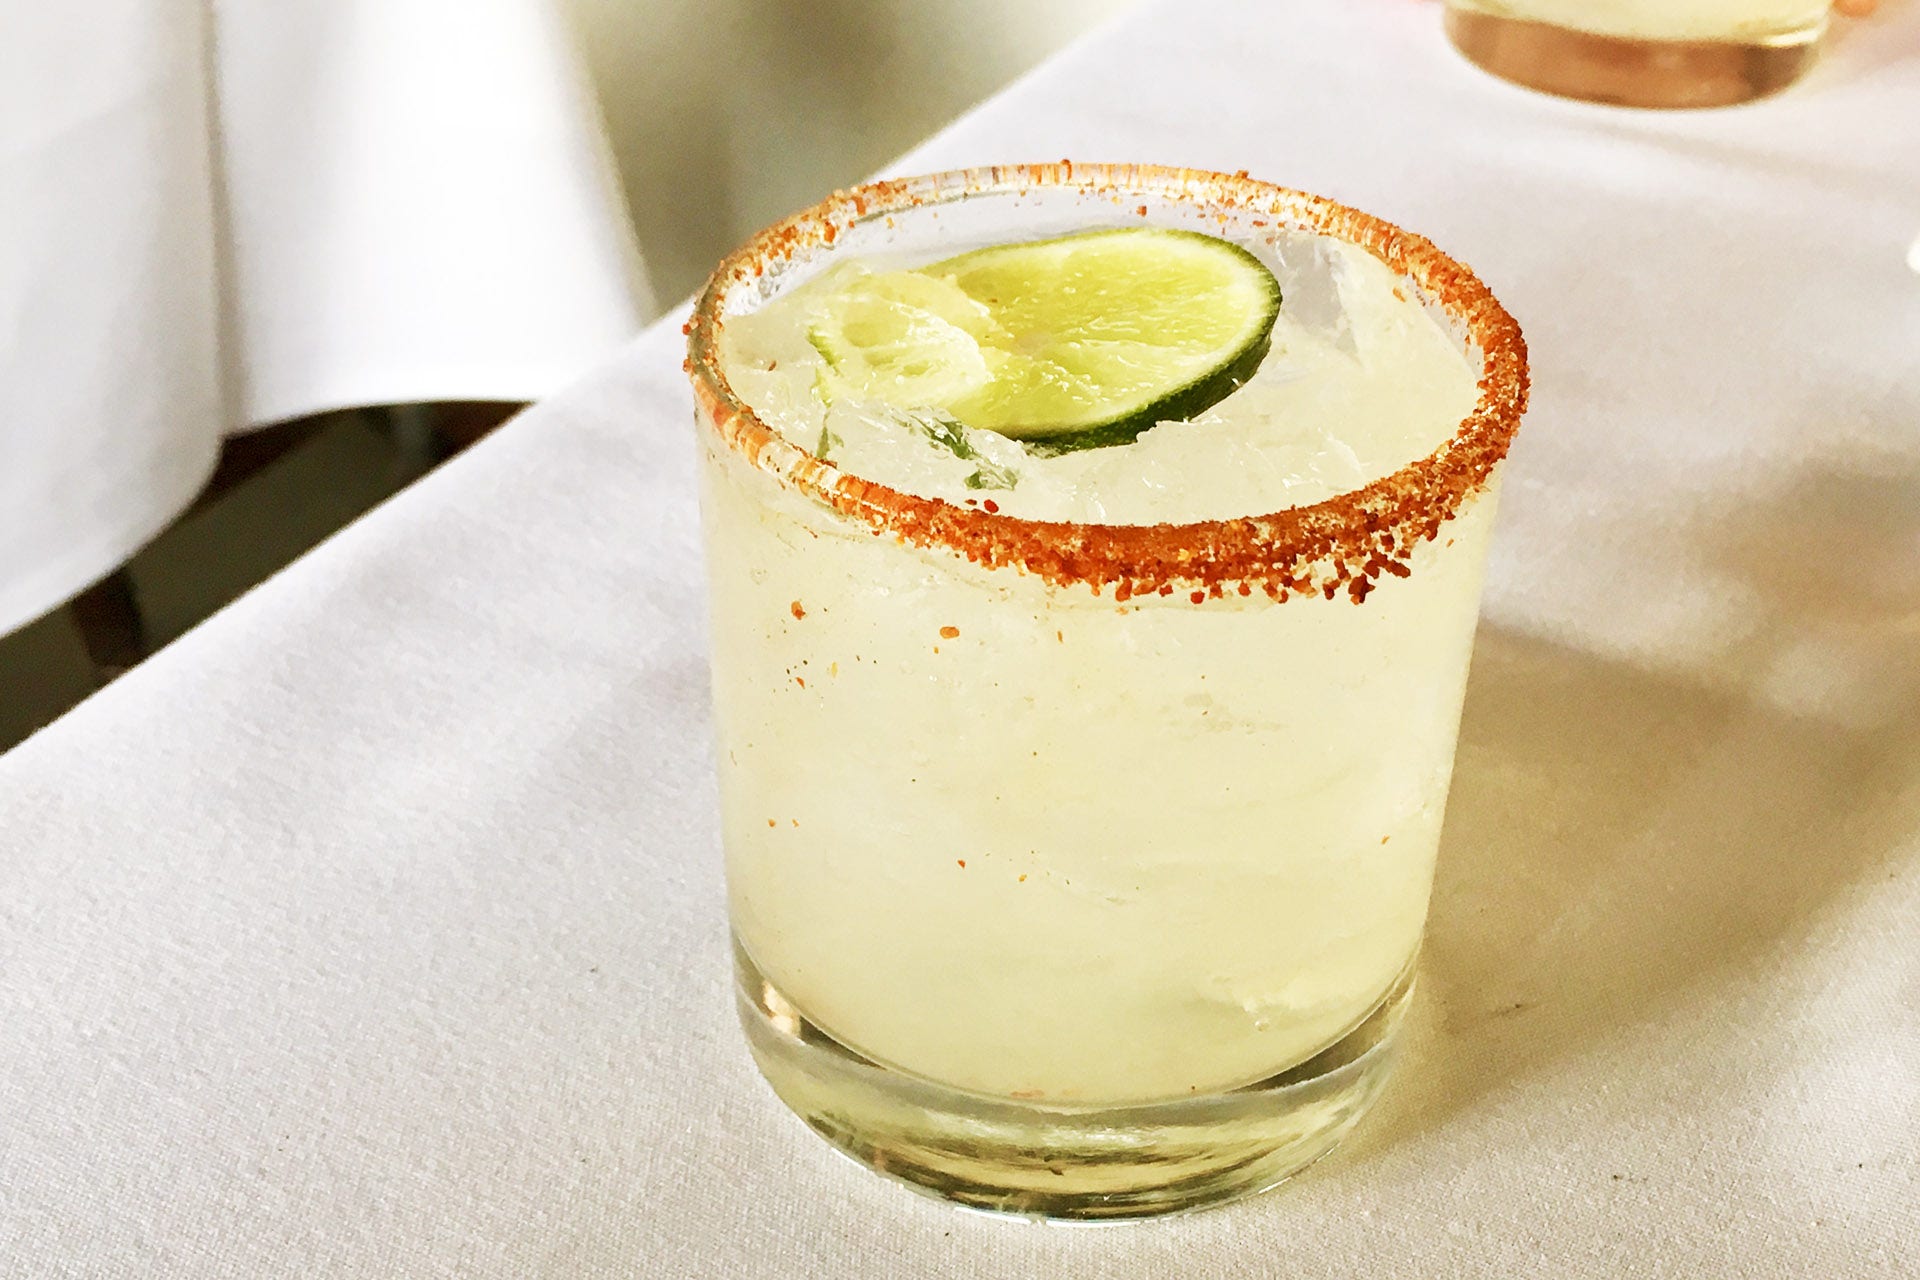 Chili-Salt Rimmed Paloma Cocktail on White Tablecloth